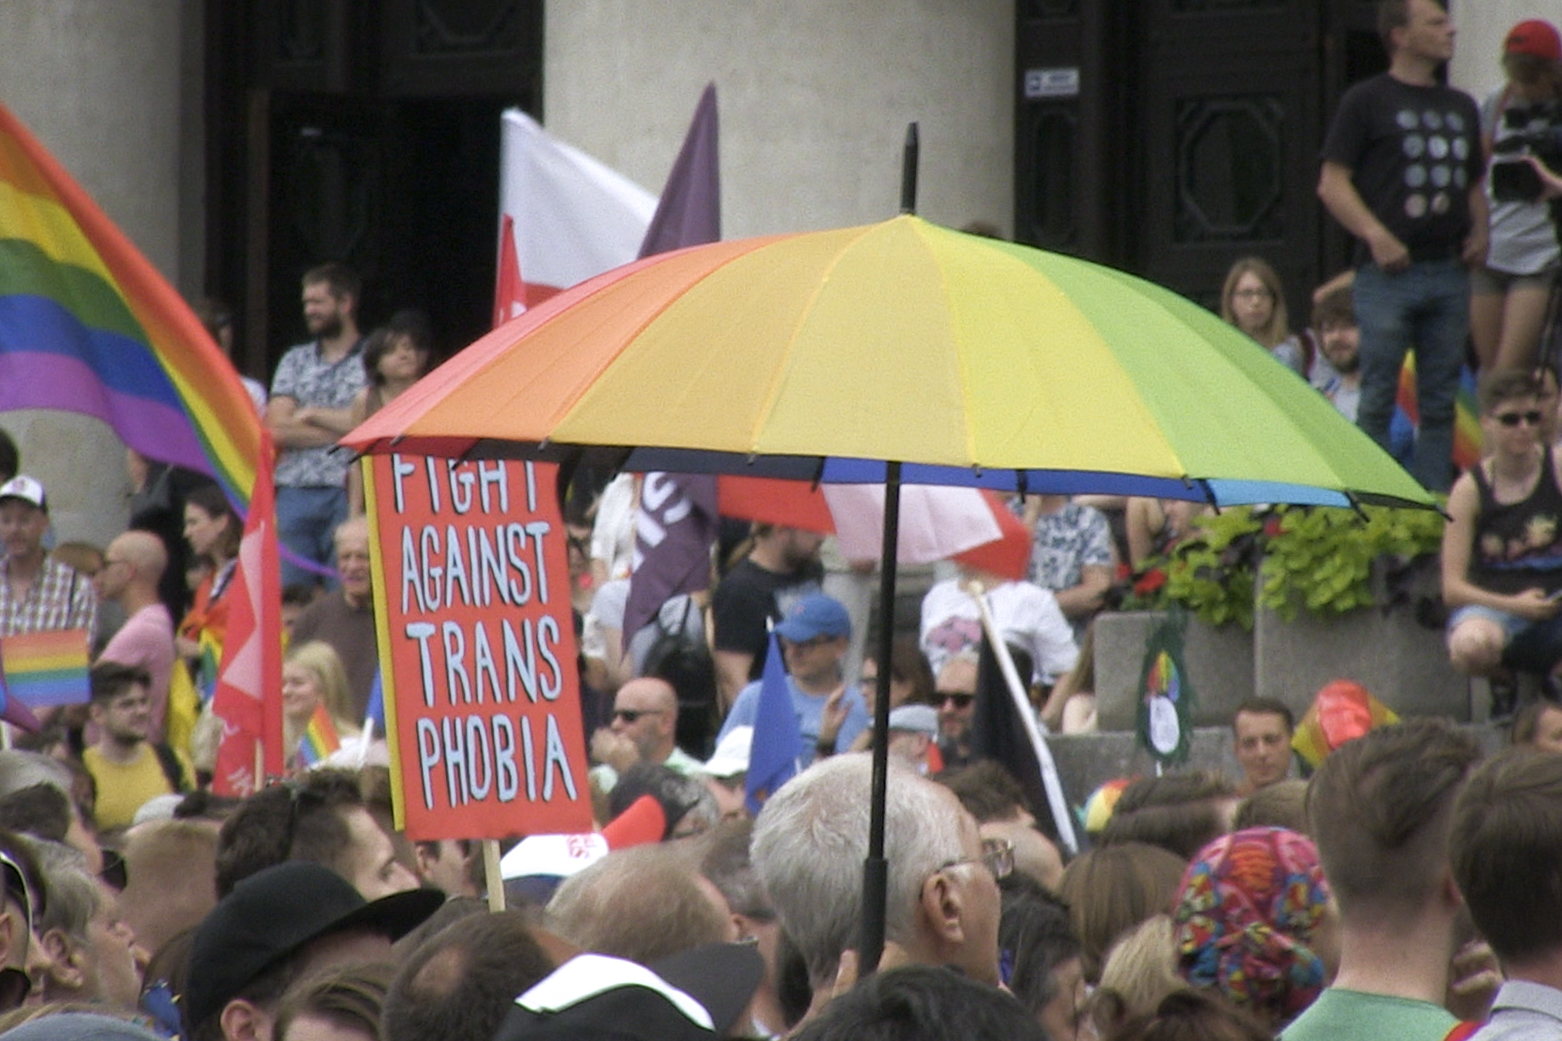 people gathered in the center of Warsaw, Poland on July 27, 2019 in support of LGBT rights following a pride march turned violent in the city of Bialystok